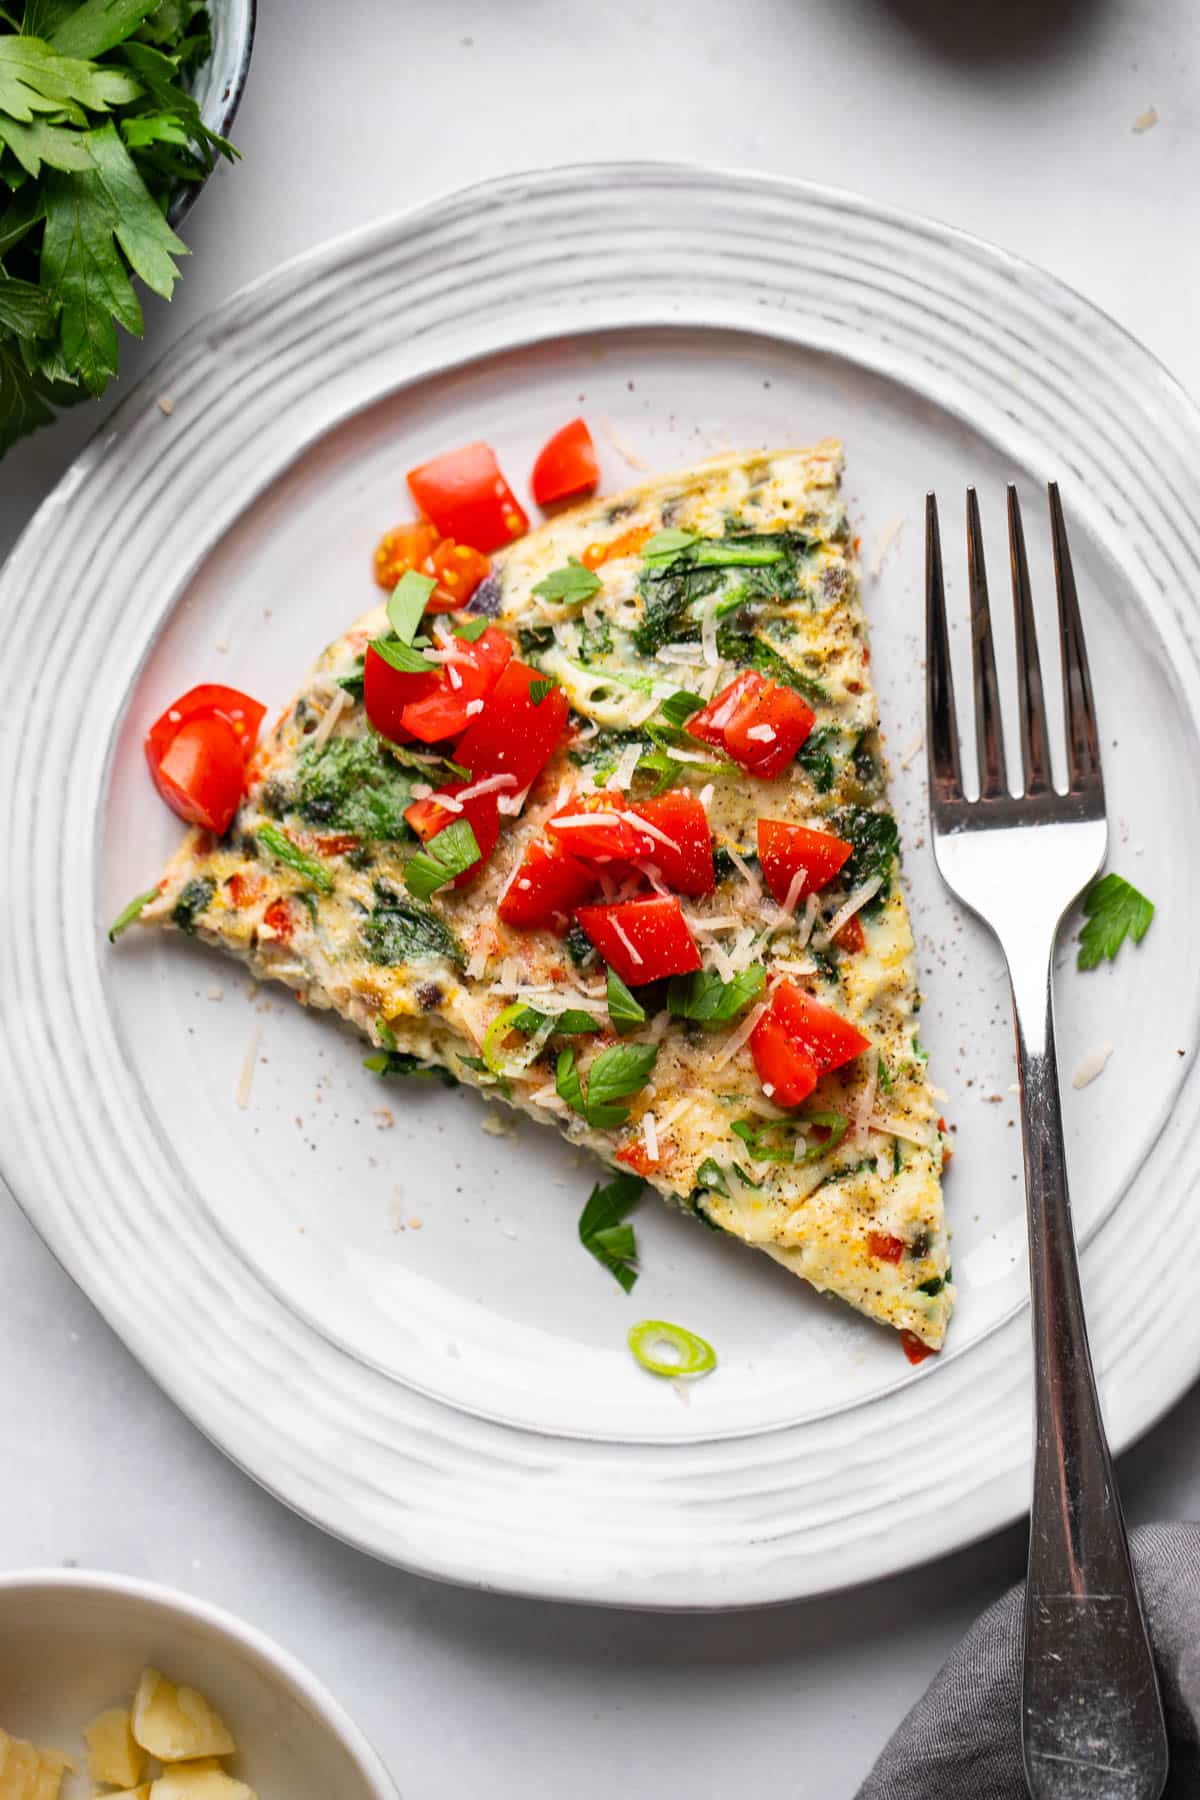 top view of single serving of healthy vegetable frittata on white plate with fork